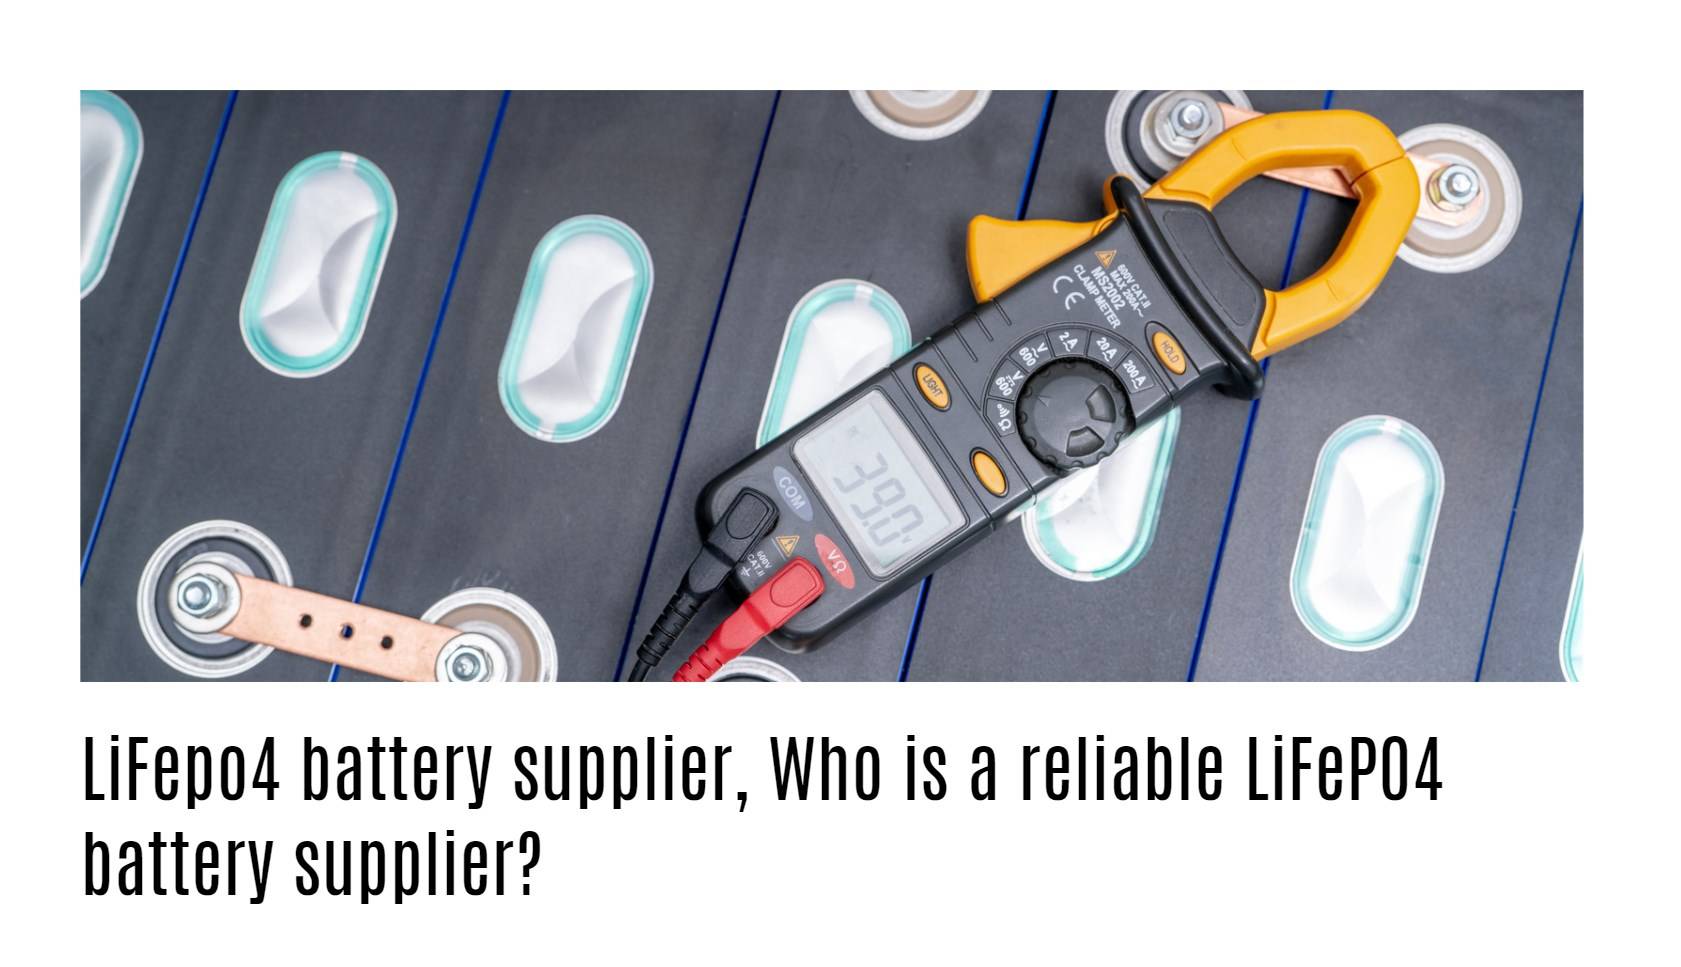 LiFepo4 battery supplier, Who is a reliable LiFePO4 battery supplier?